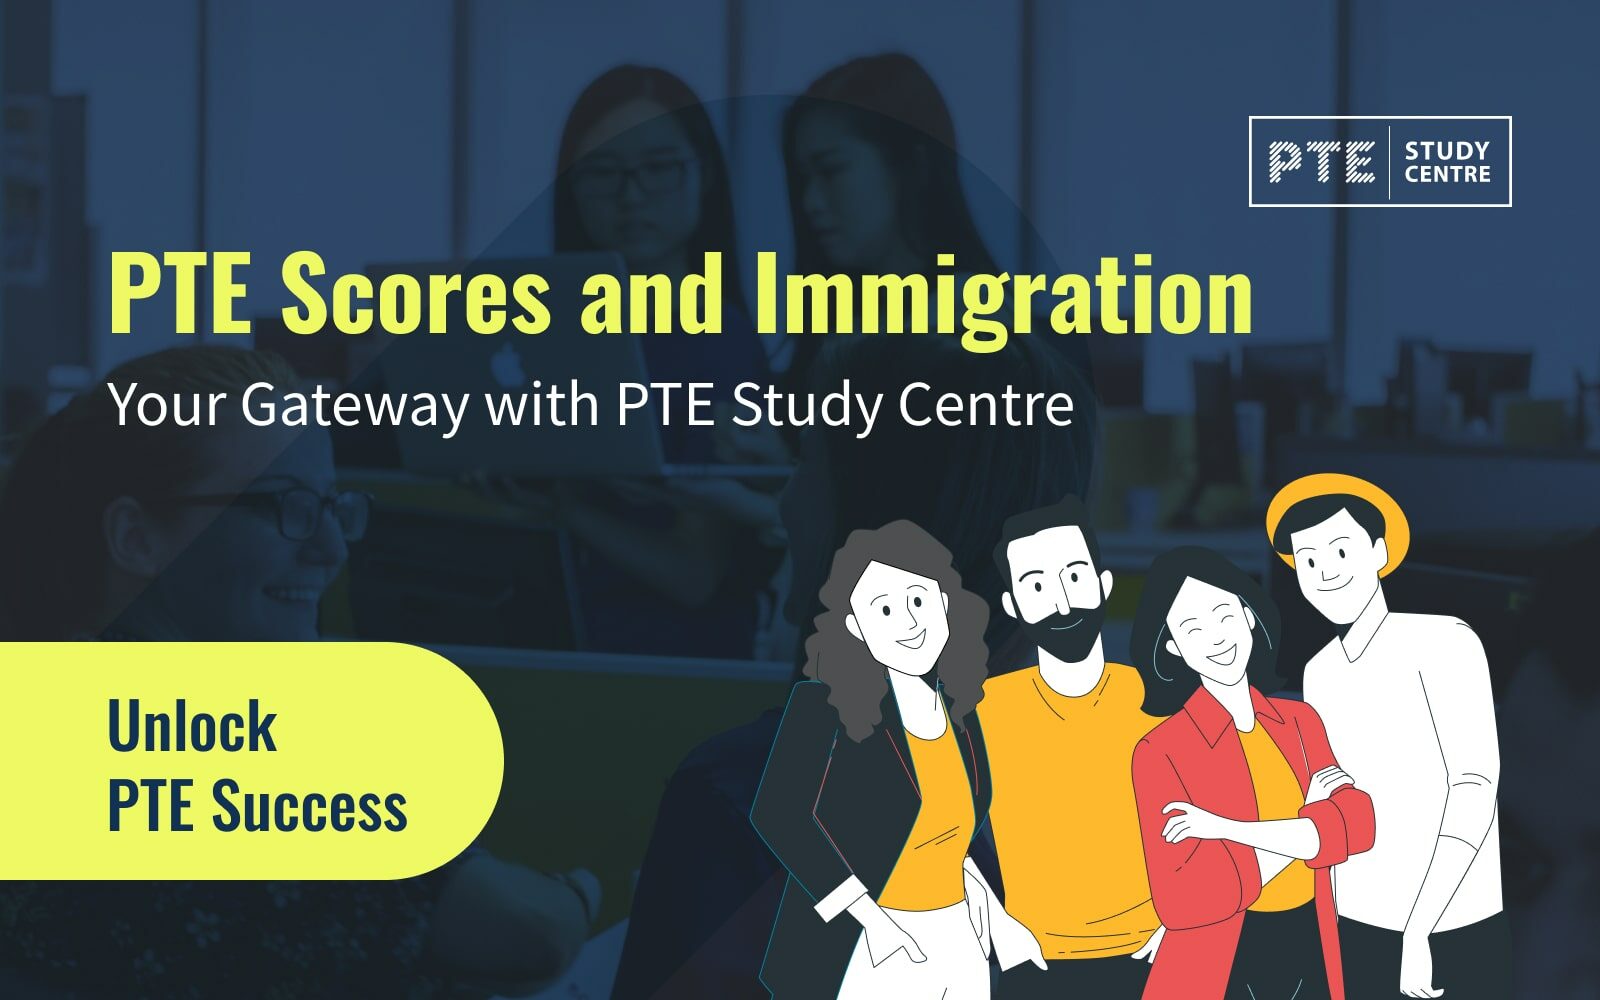 PTE Scores and Immigration: Your Gateway with PTE Study Centre